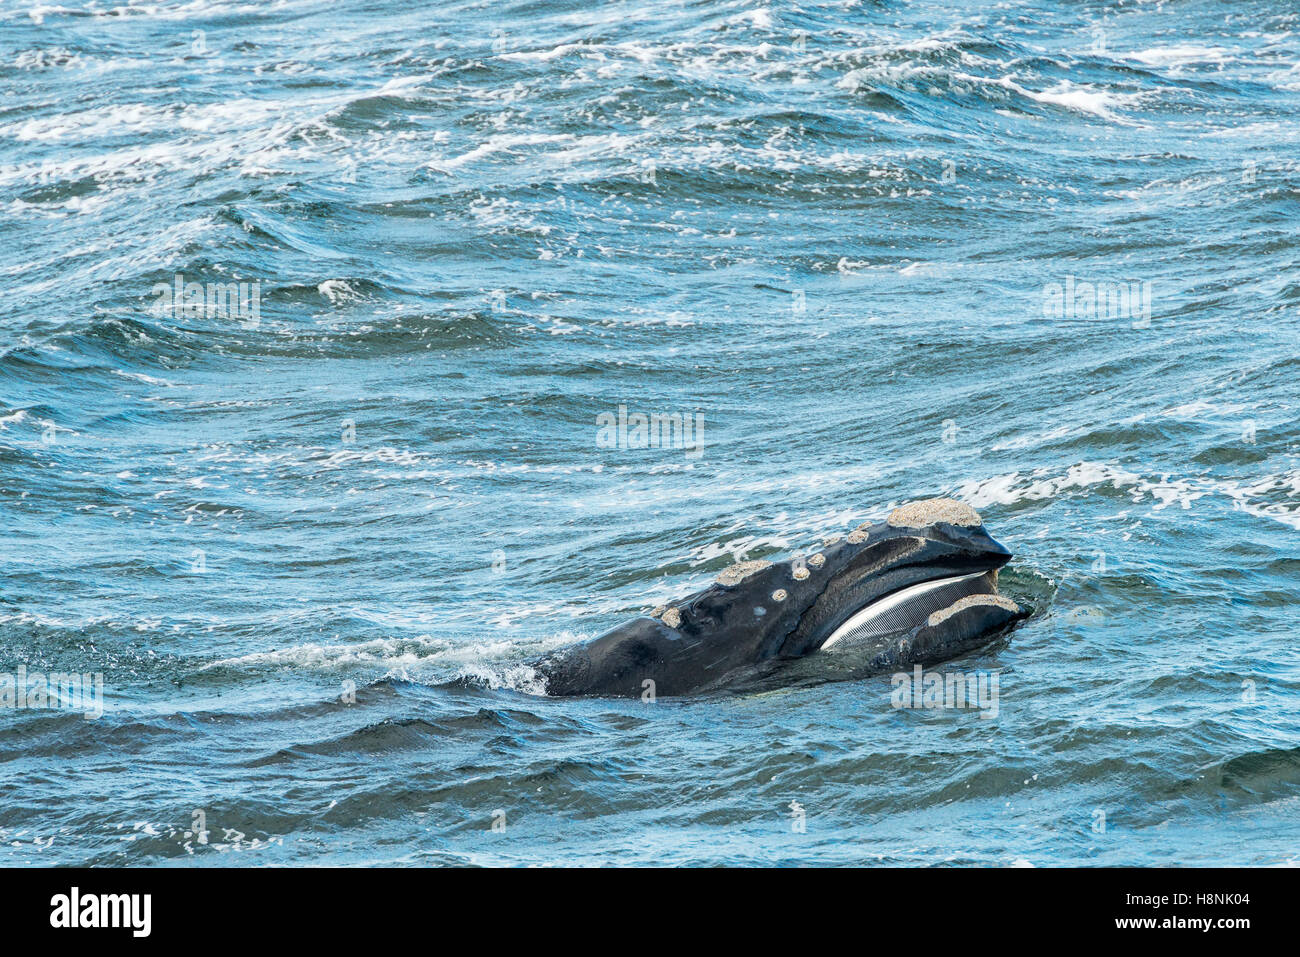 Southern Right Whale surfaces from the ocean Stock Photo